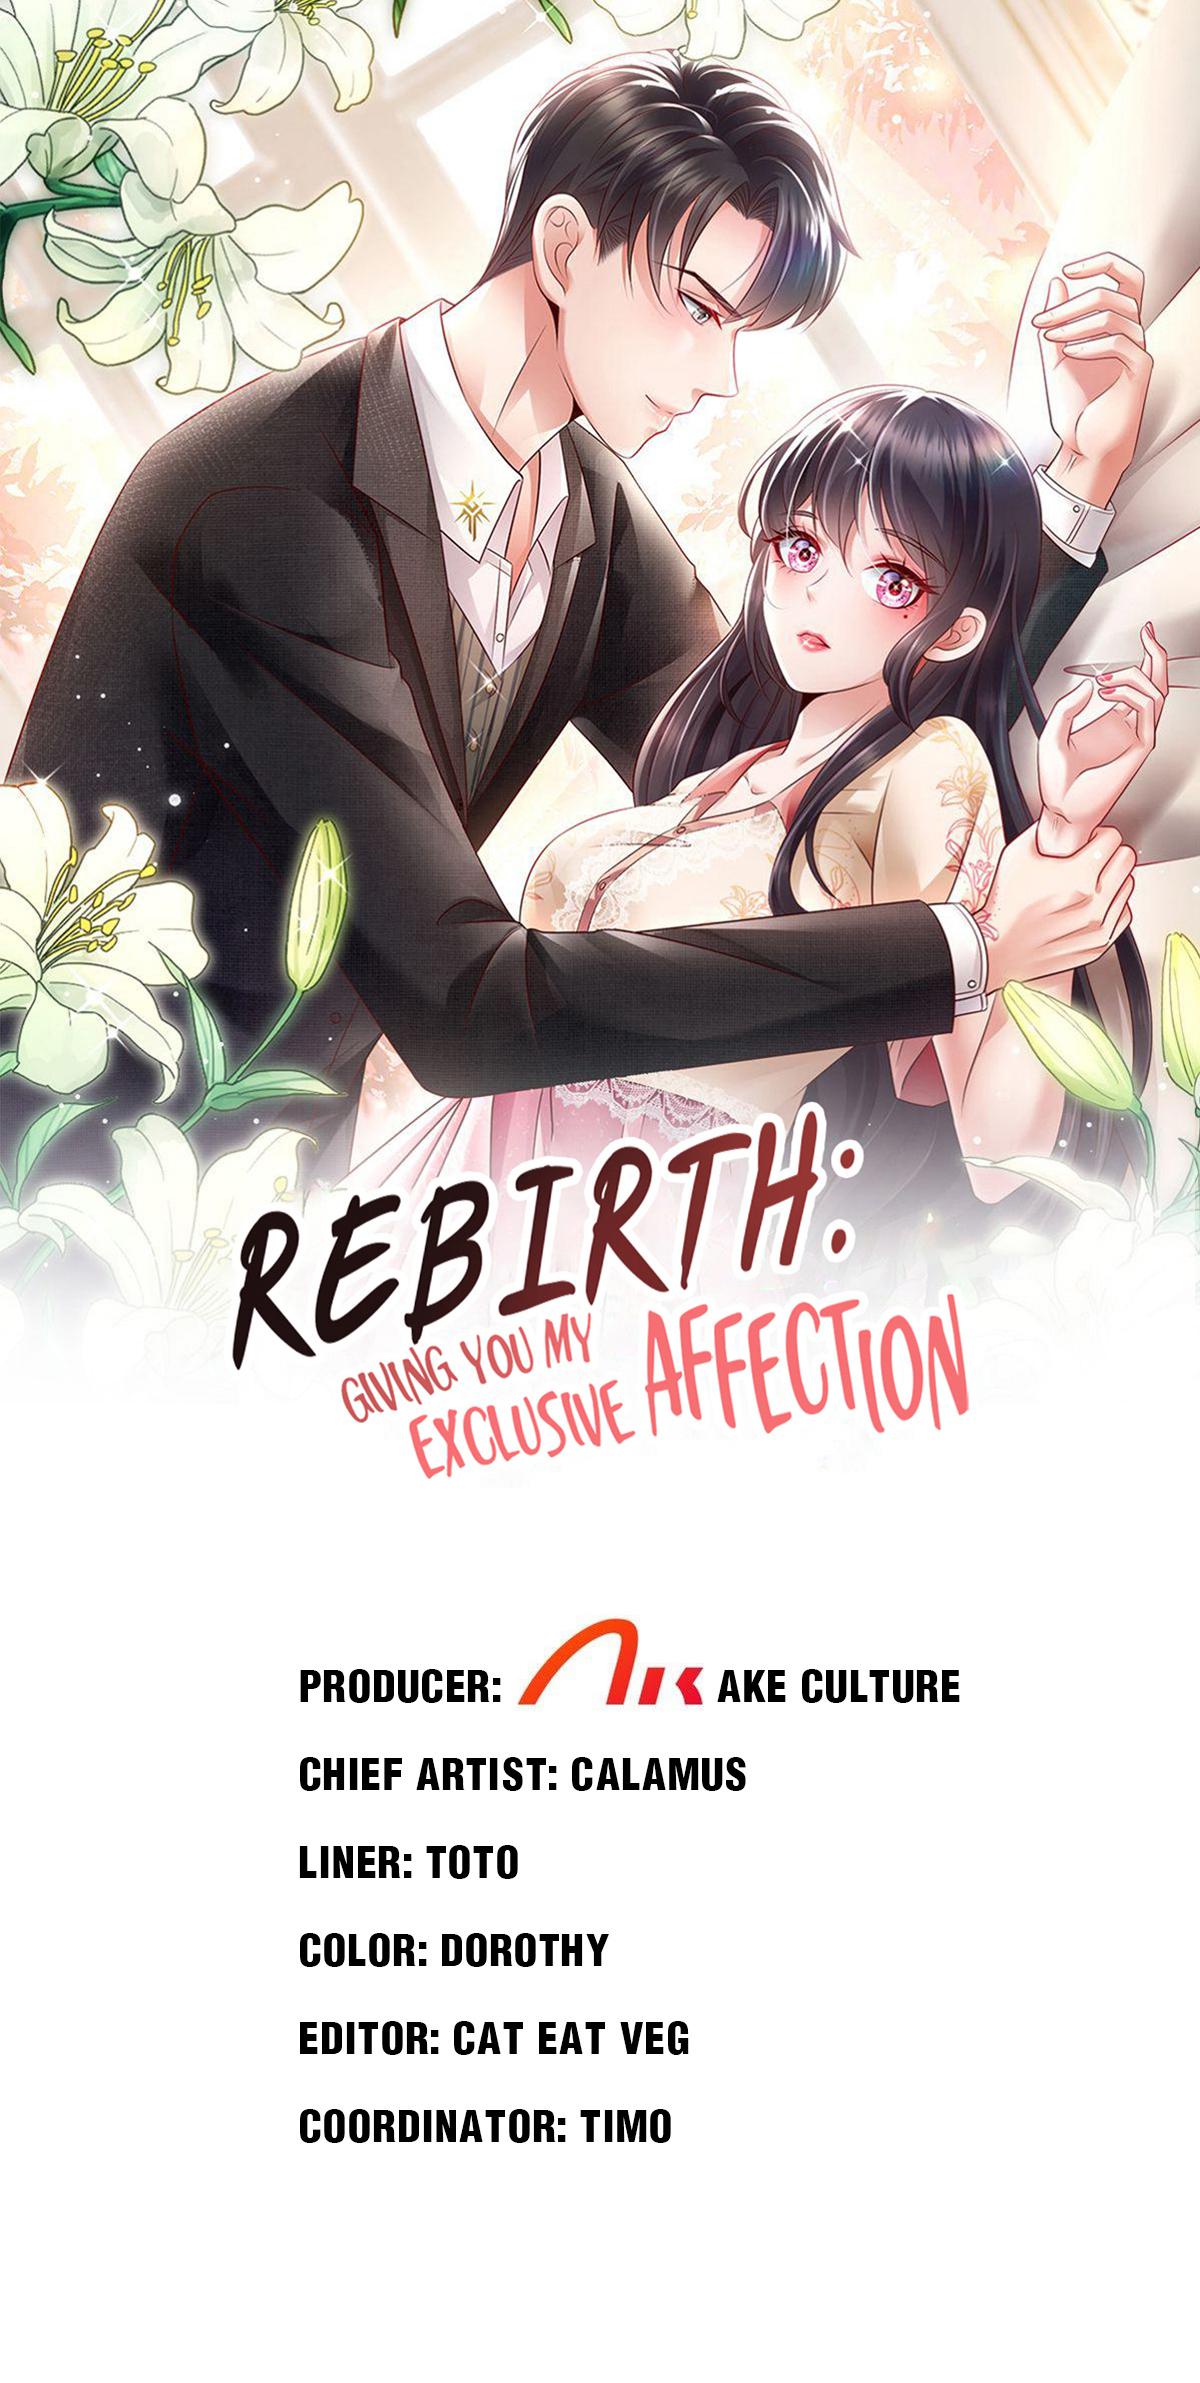 Rebirth: Giving You My Exclusive Affection 175